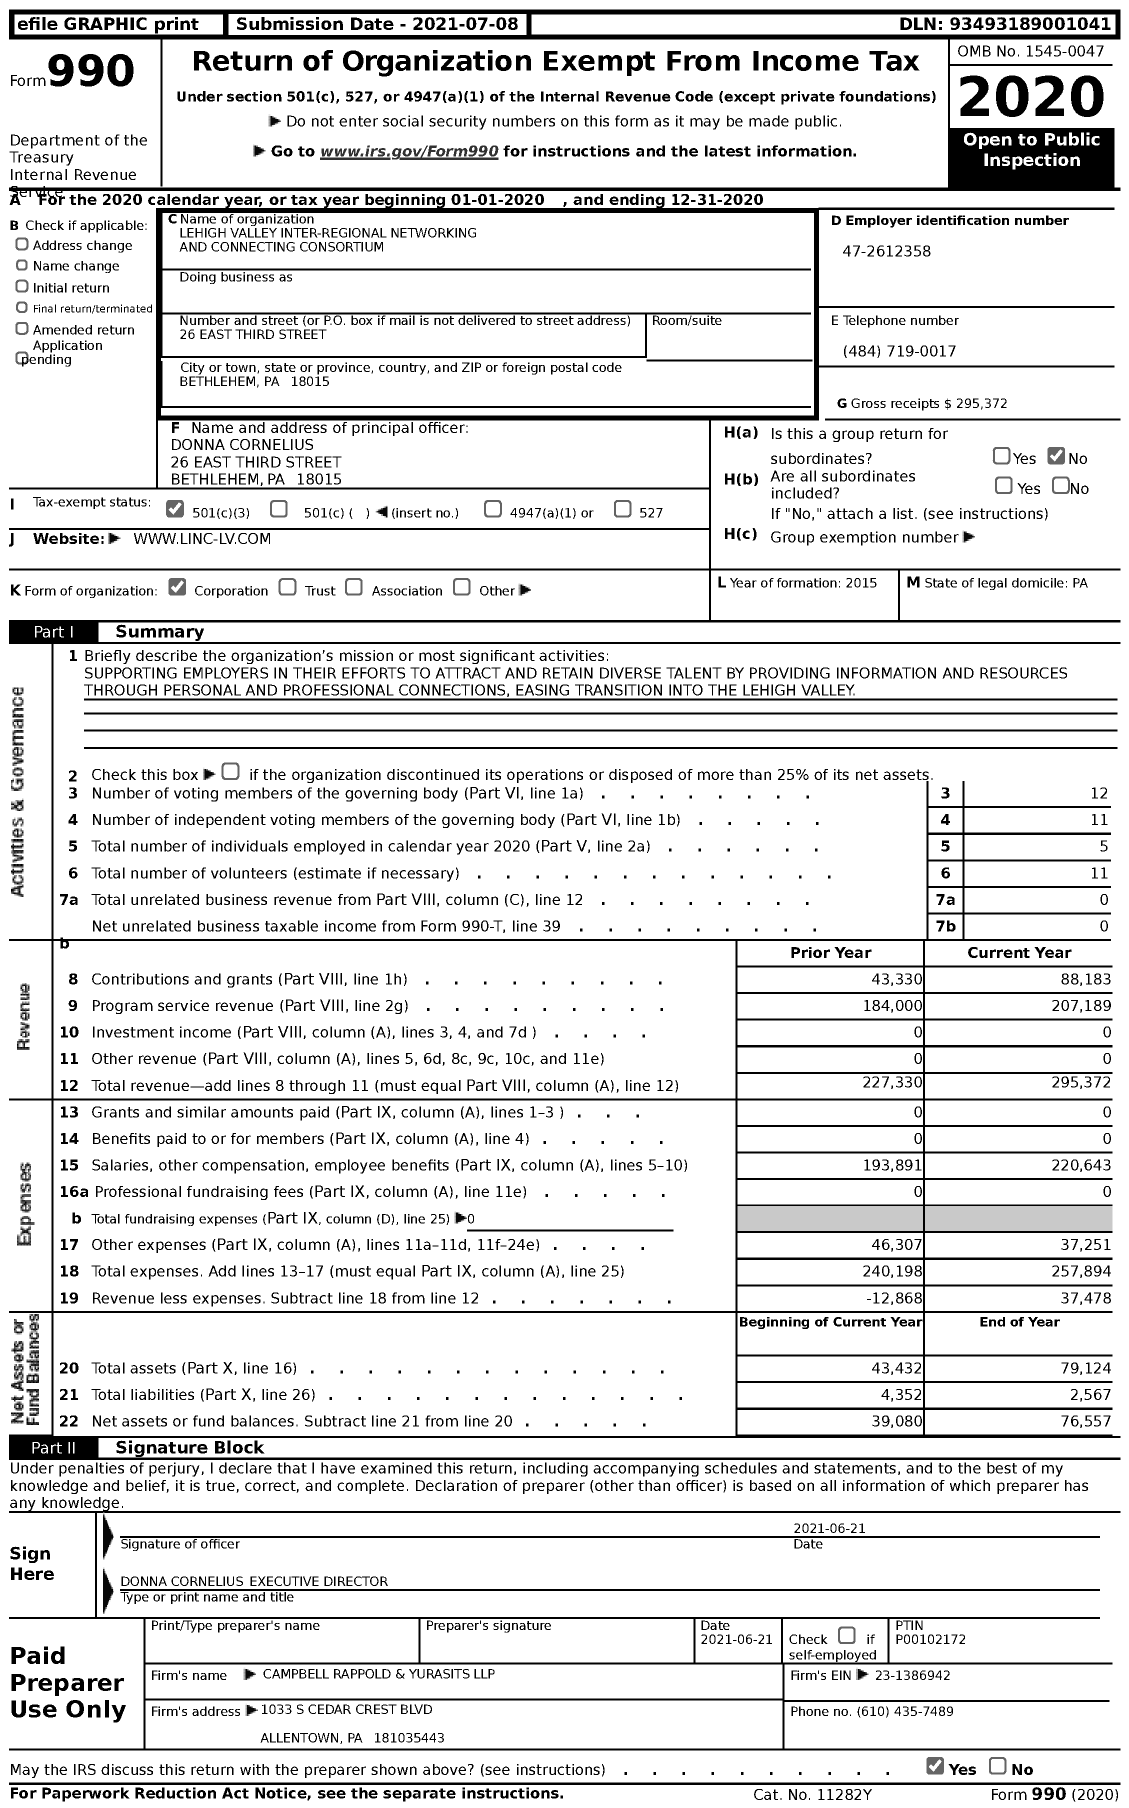 Image of first page of 2020 Form 990 for Lehigh Valley Inter-Regional Networking and Connecting Consortium